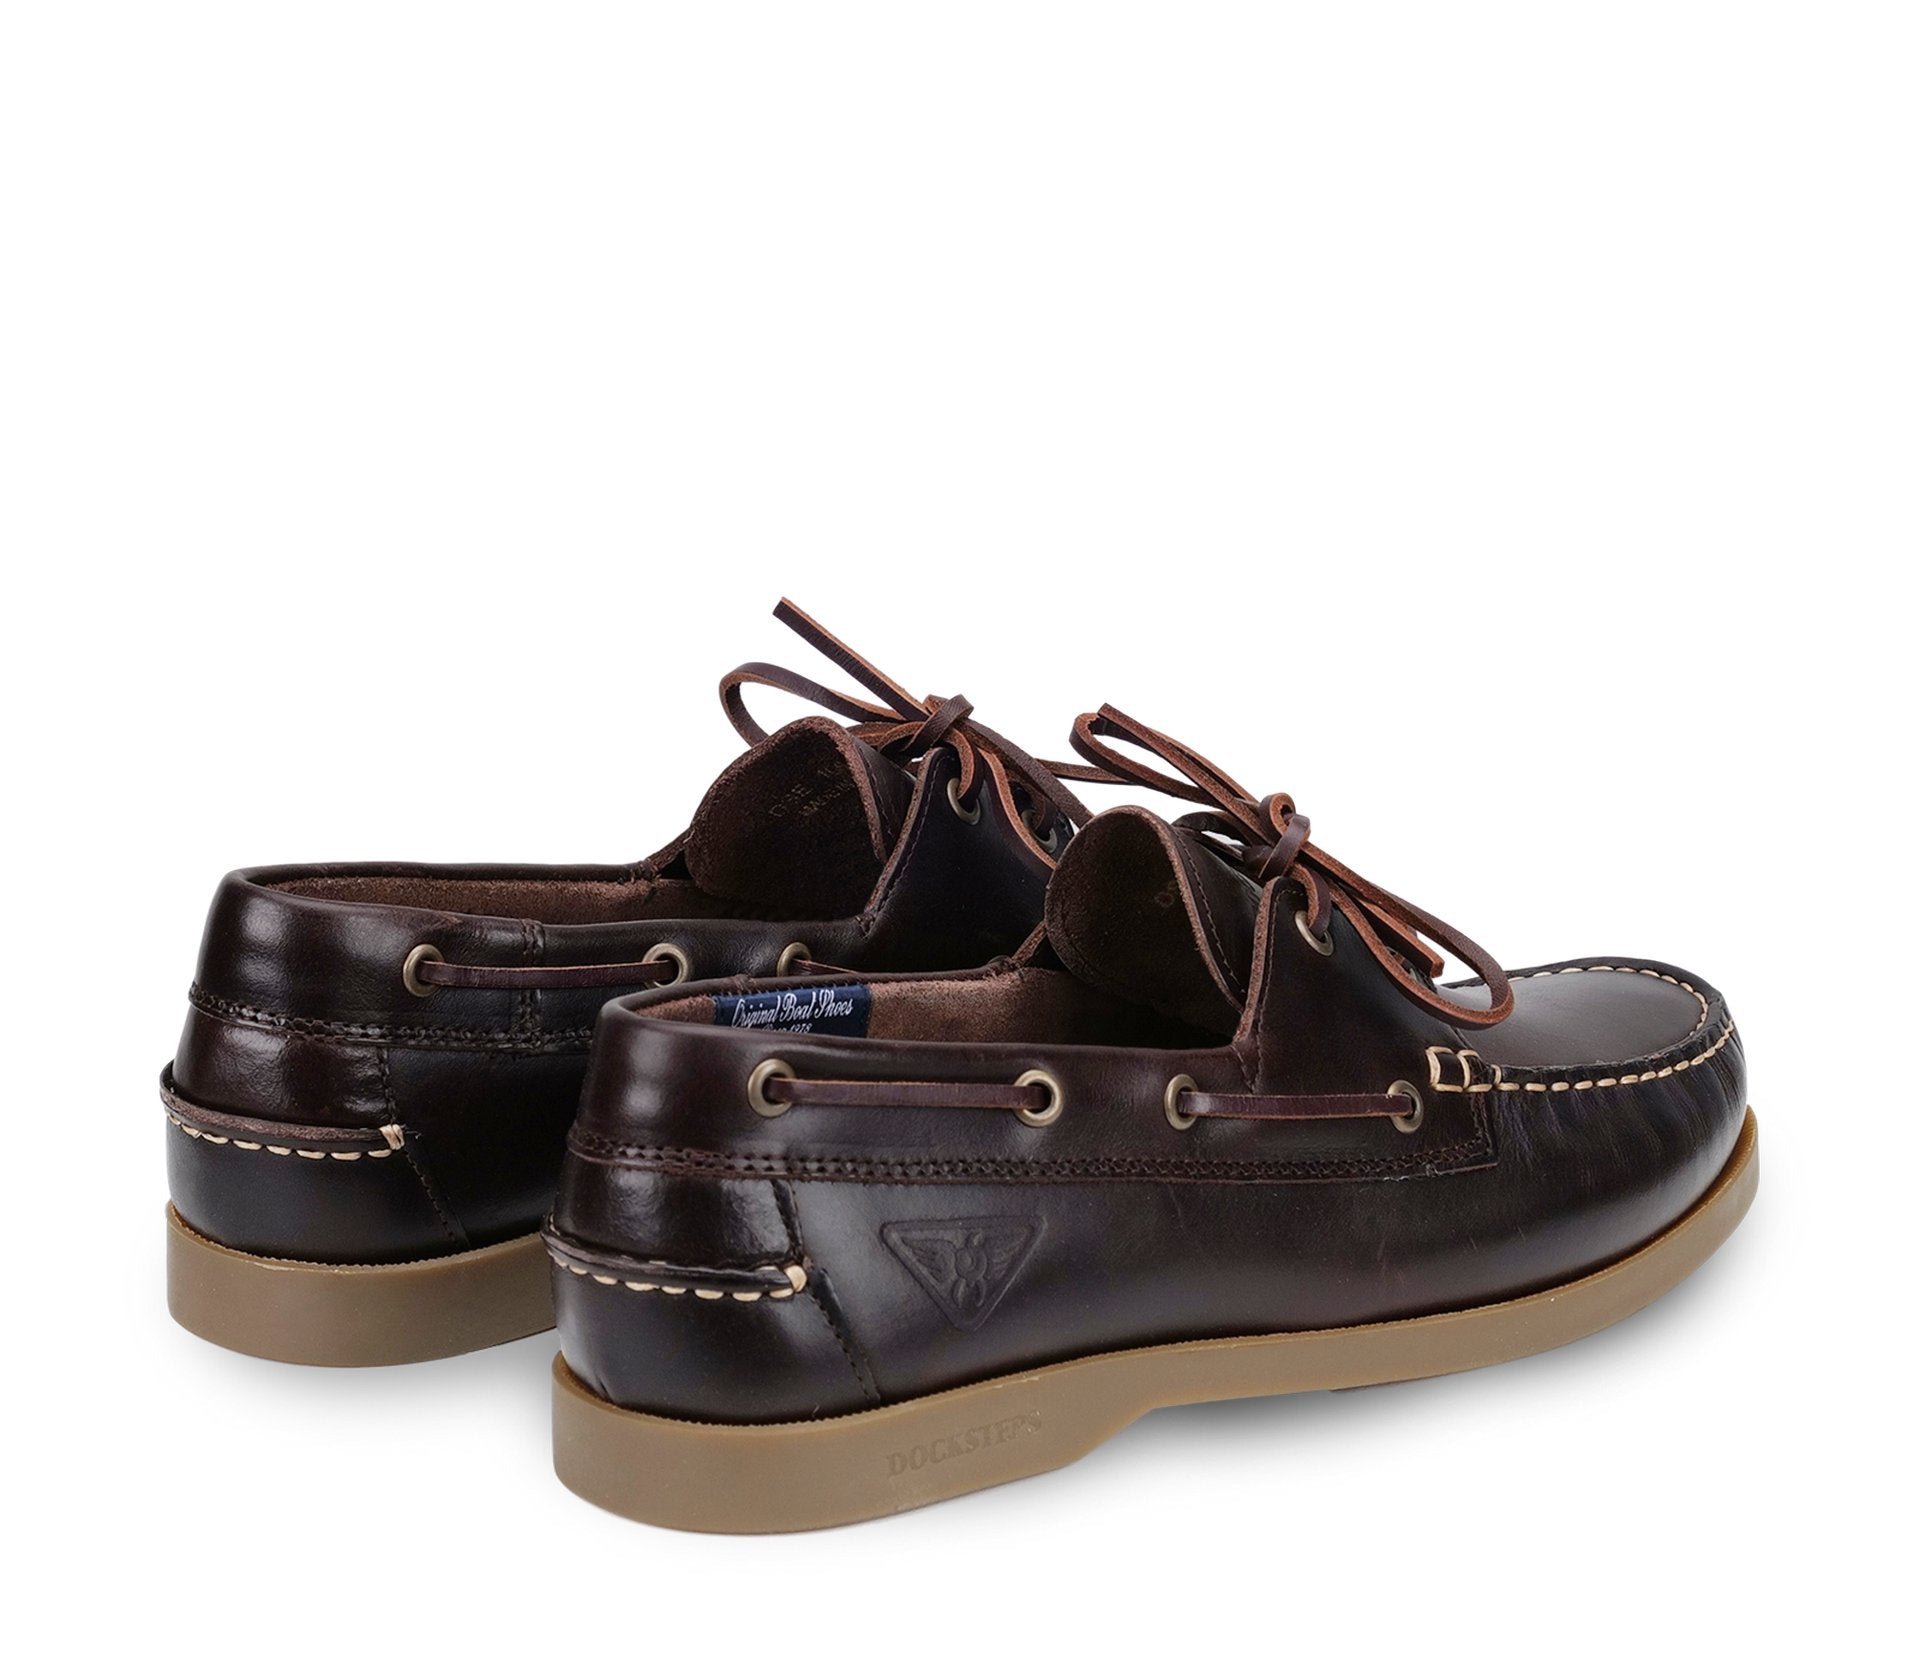 Men's Tone on Tone Laced Boat Shoes